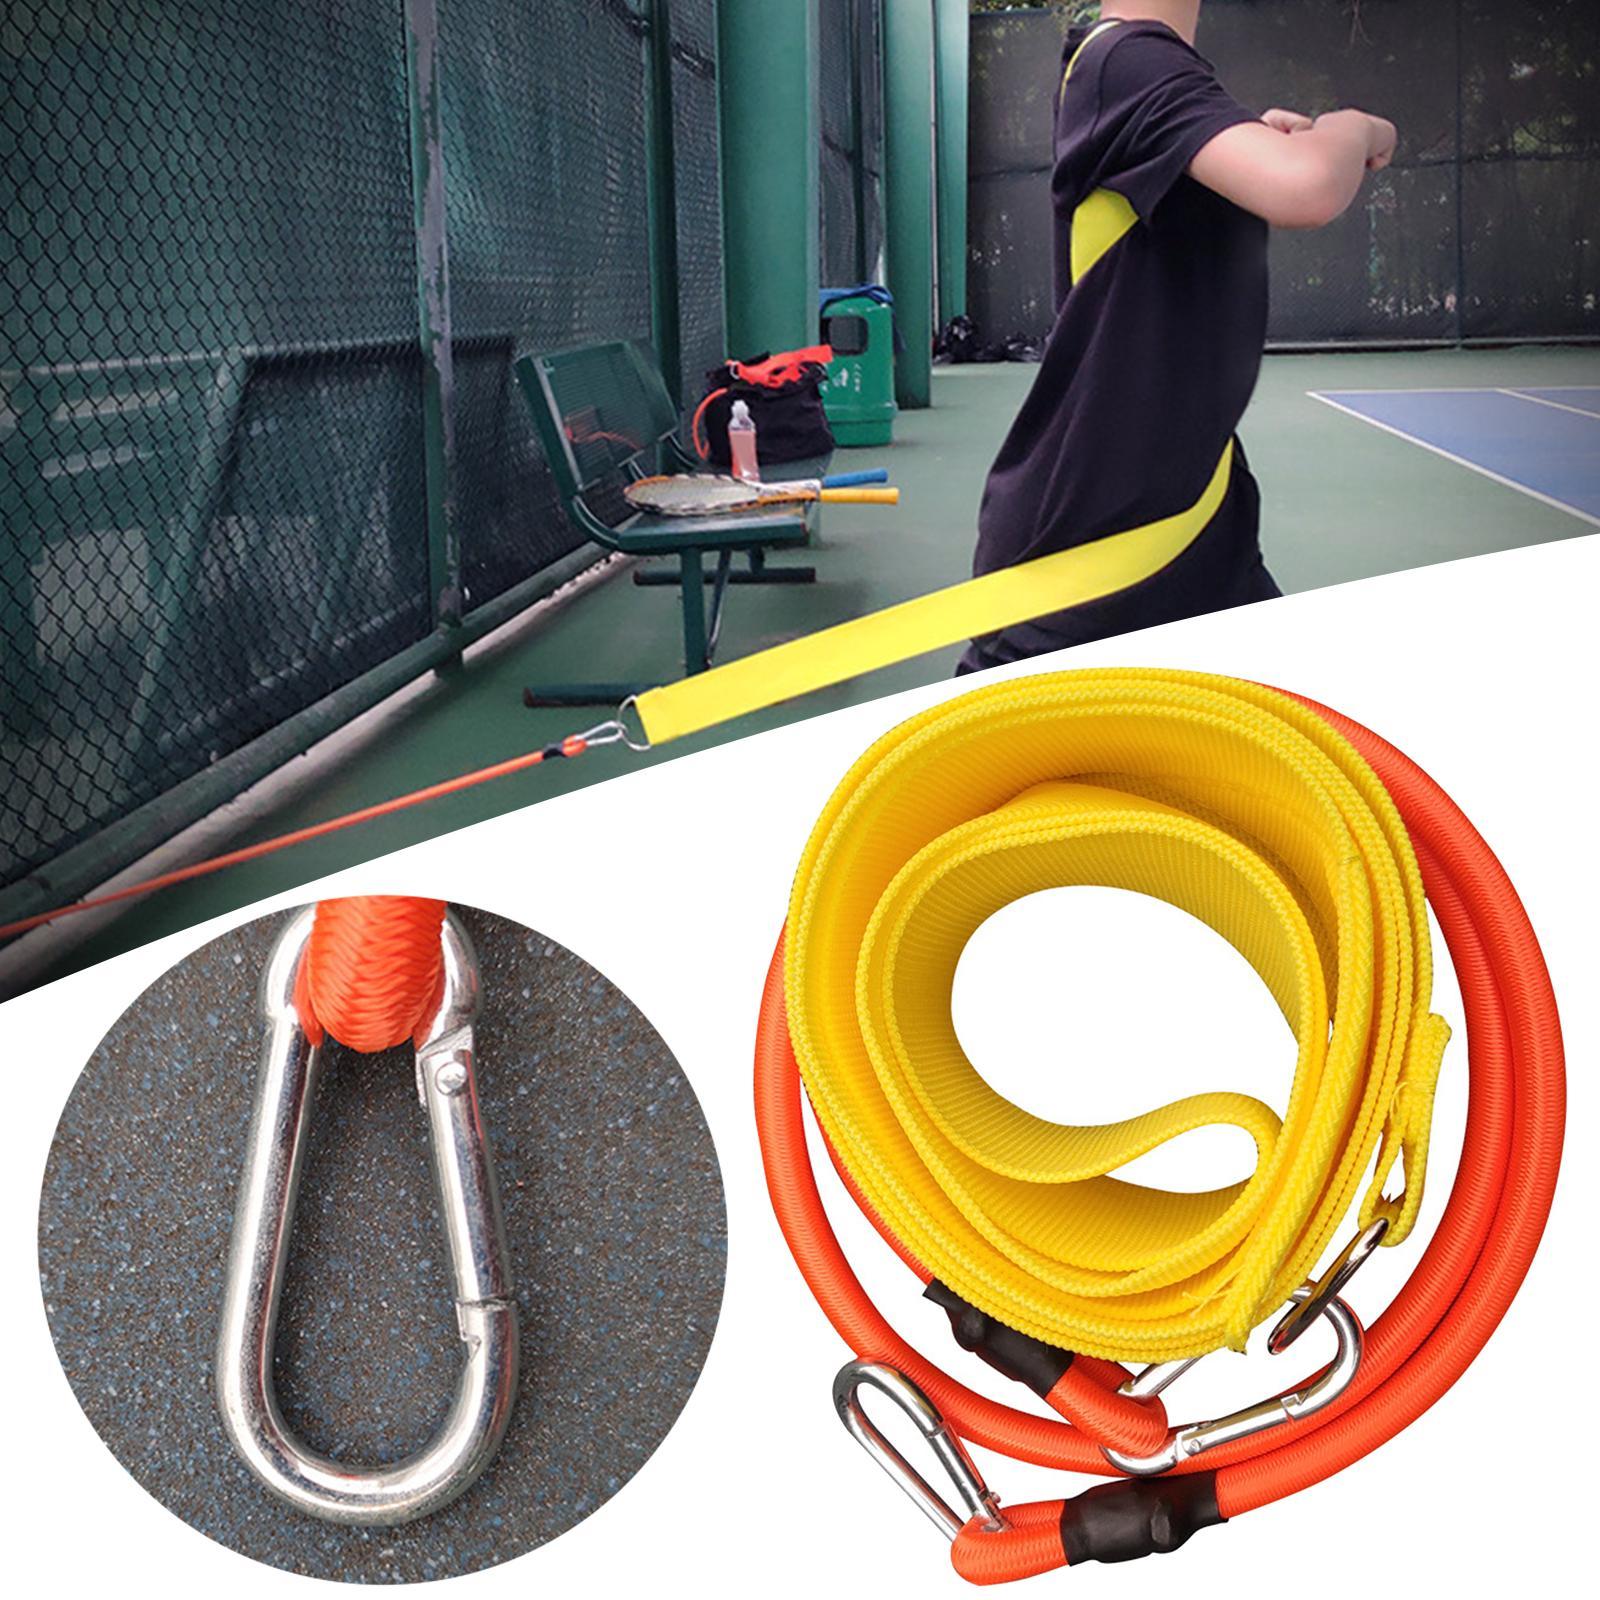 Swing Resistance Bands Elastic Rope Tennis Swivel Belt Pull Rope for Pilates and GYM